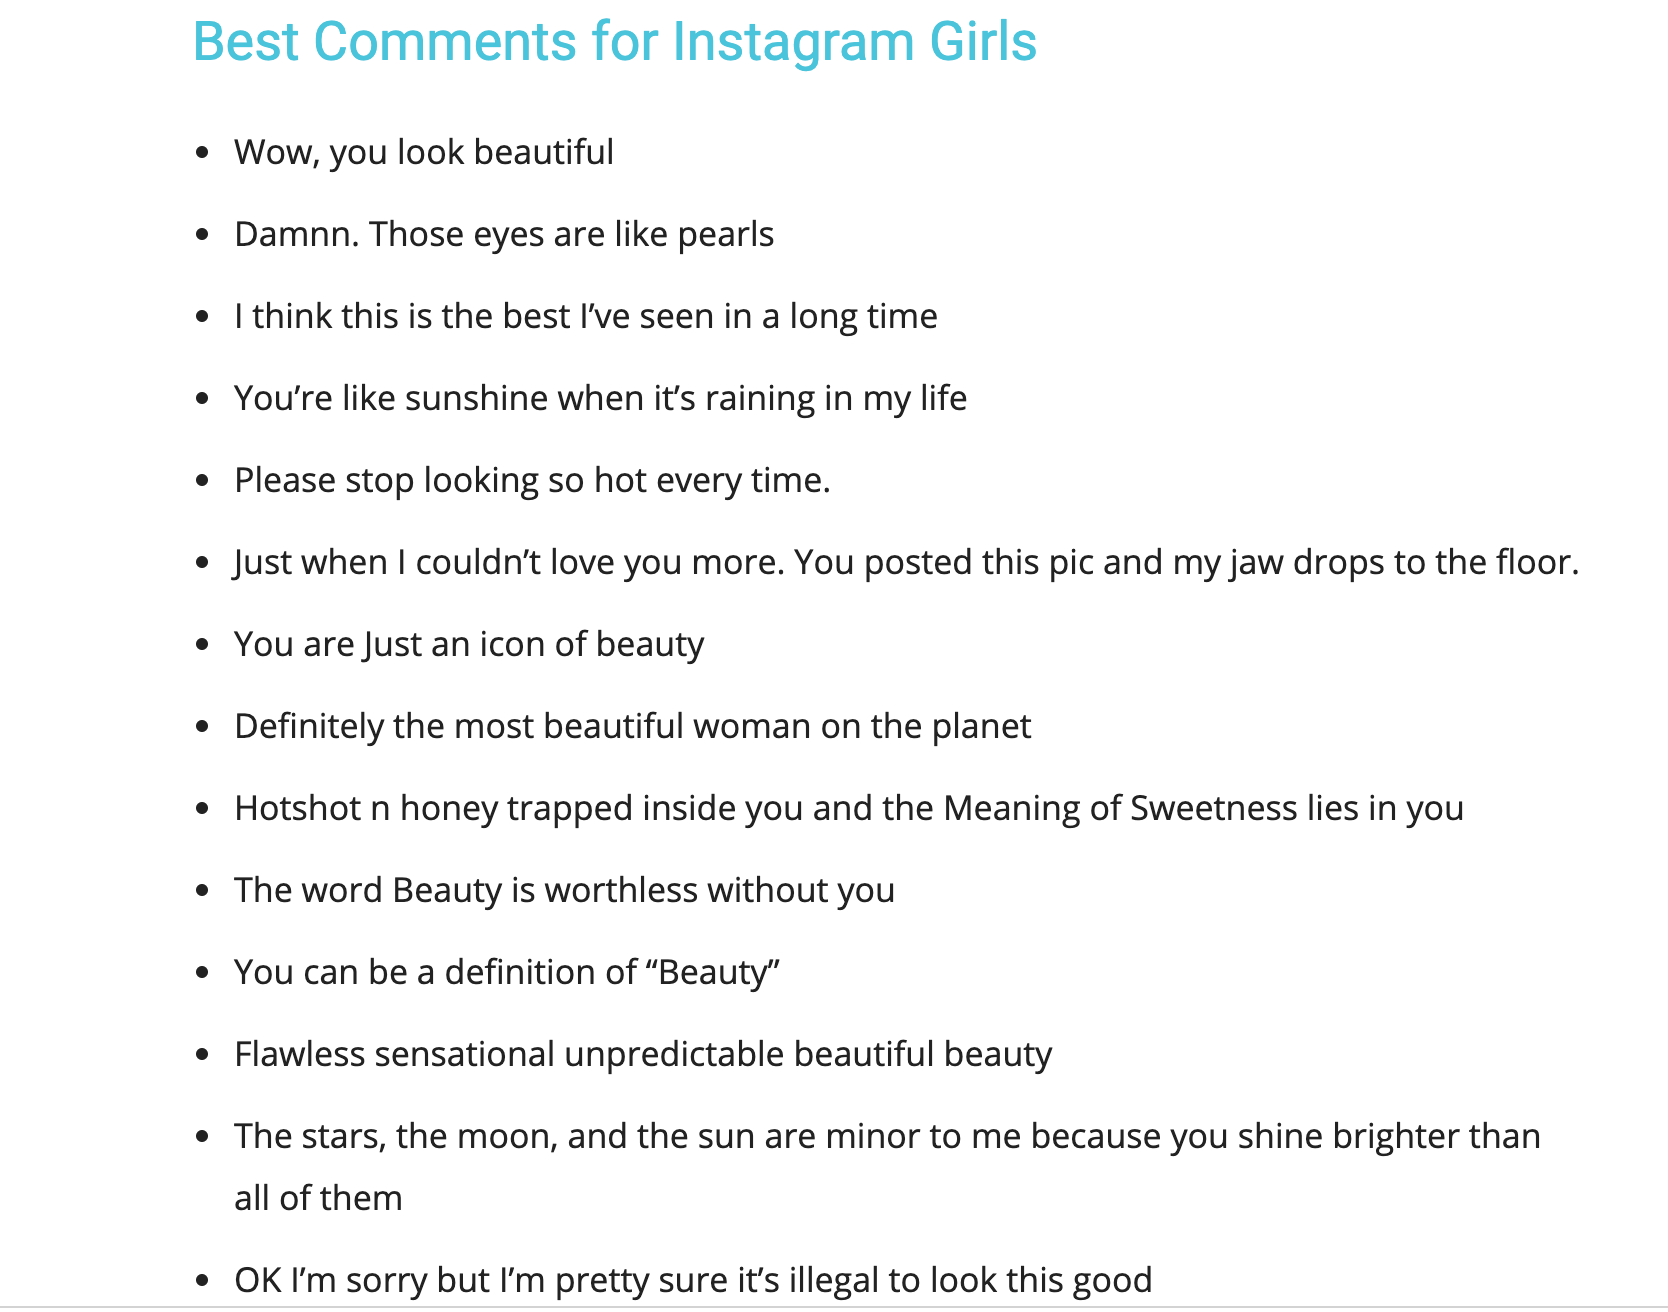 Best Comments for Girls Picture that Suits for Beautiful Girls in 2021